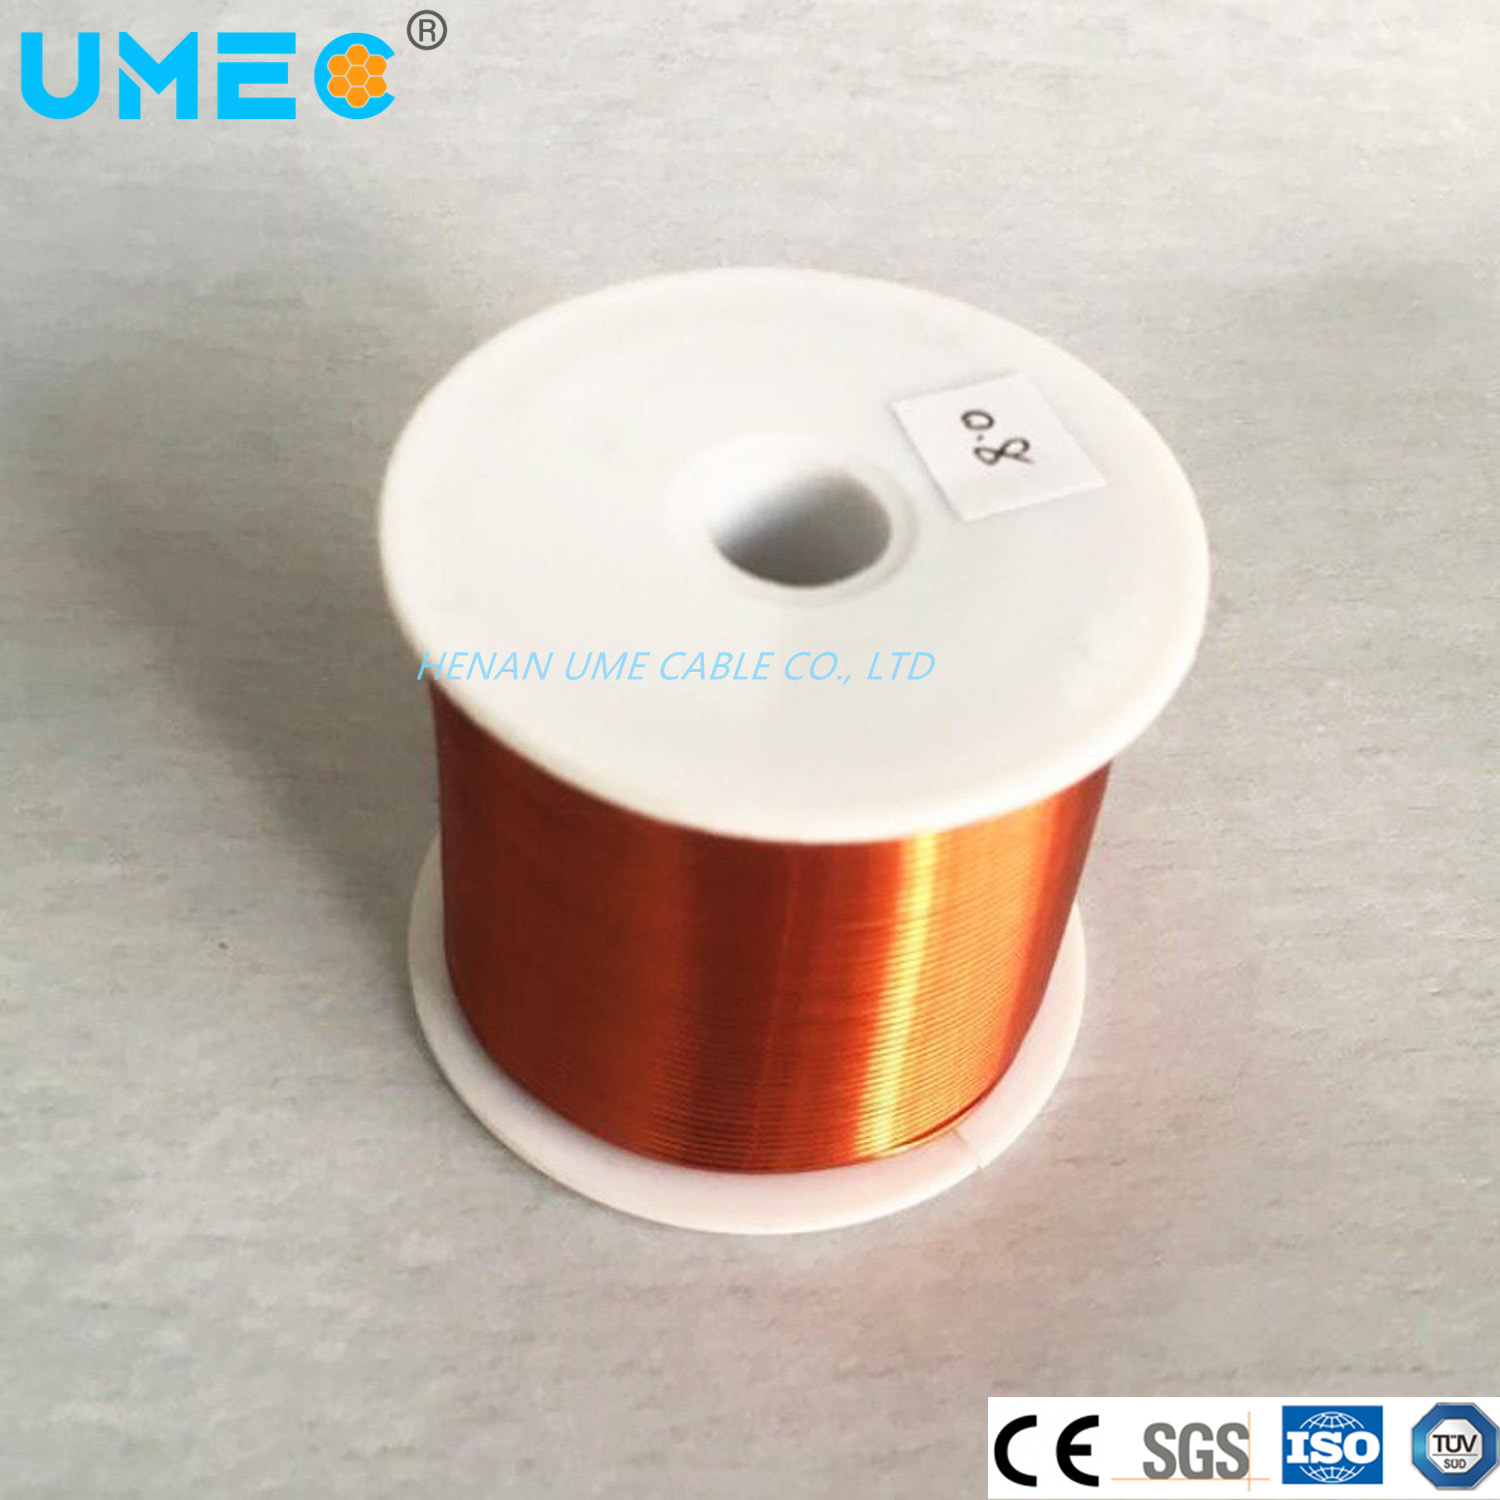 Enameled Copper Winding Wire Rectangular Al Square Wire Enamel Flat Al Wire for Transformer Coil Winding Enameled Cable Wire